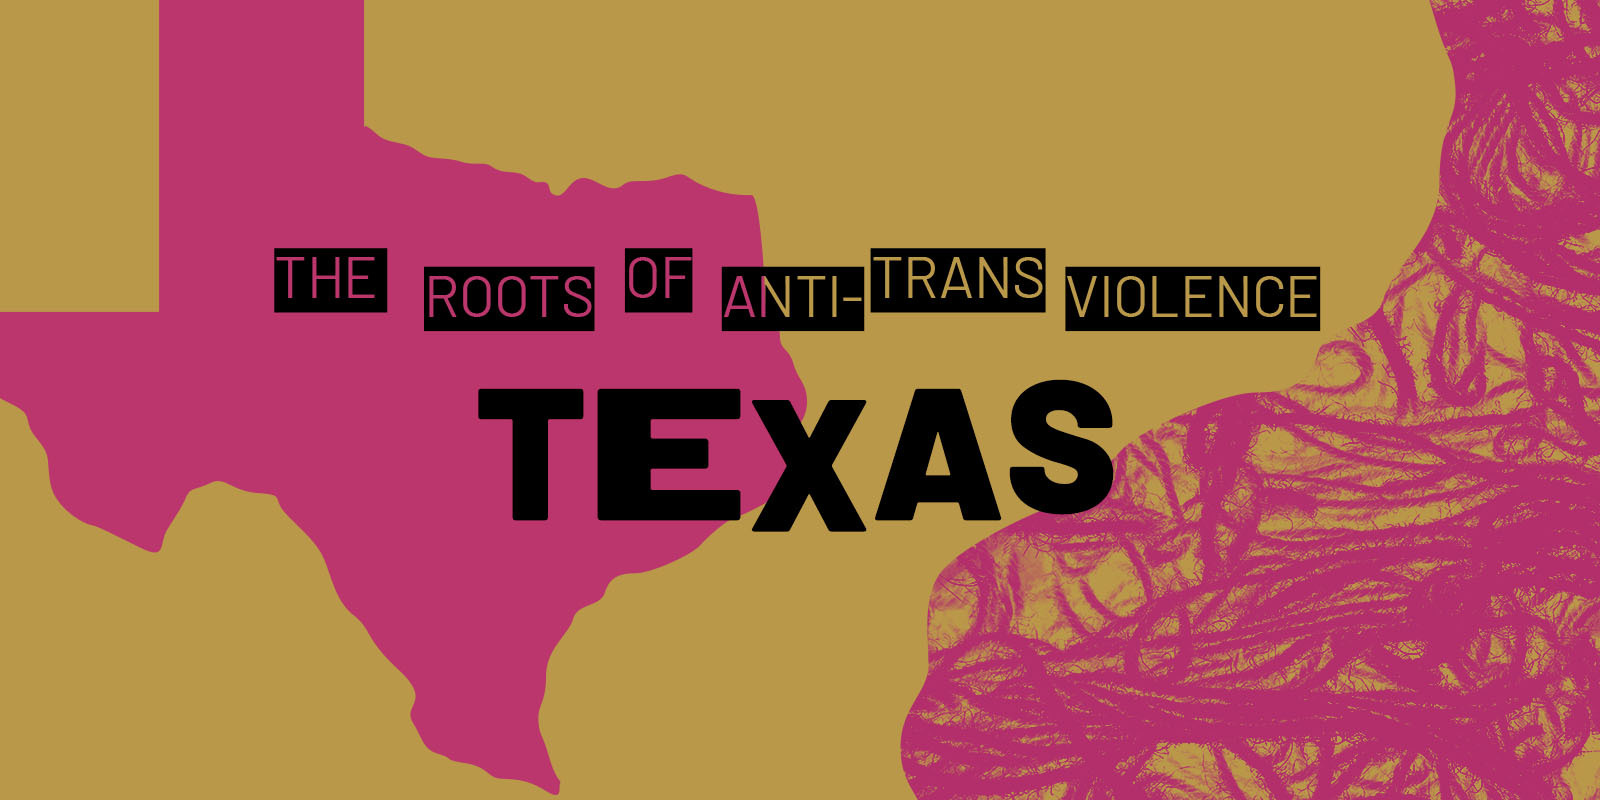 The Roots of Anti-Violence: Texas is set against a brown background.